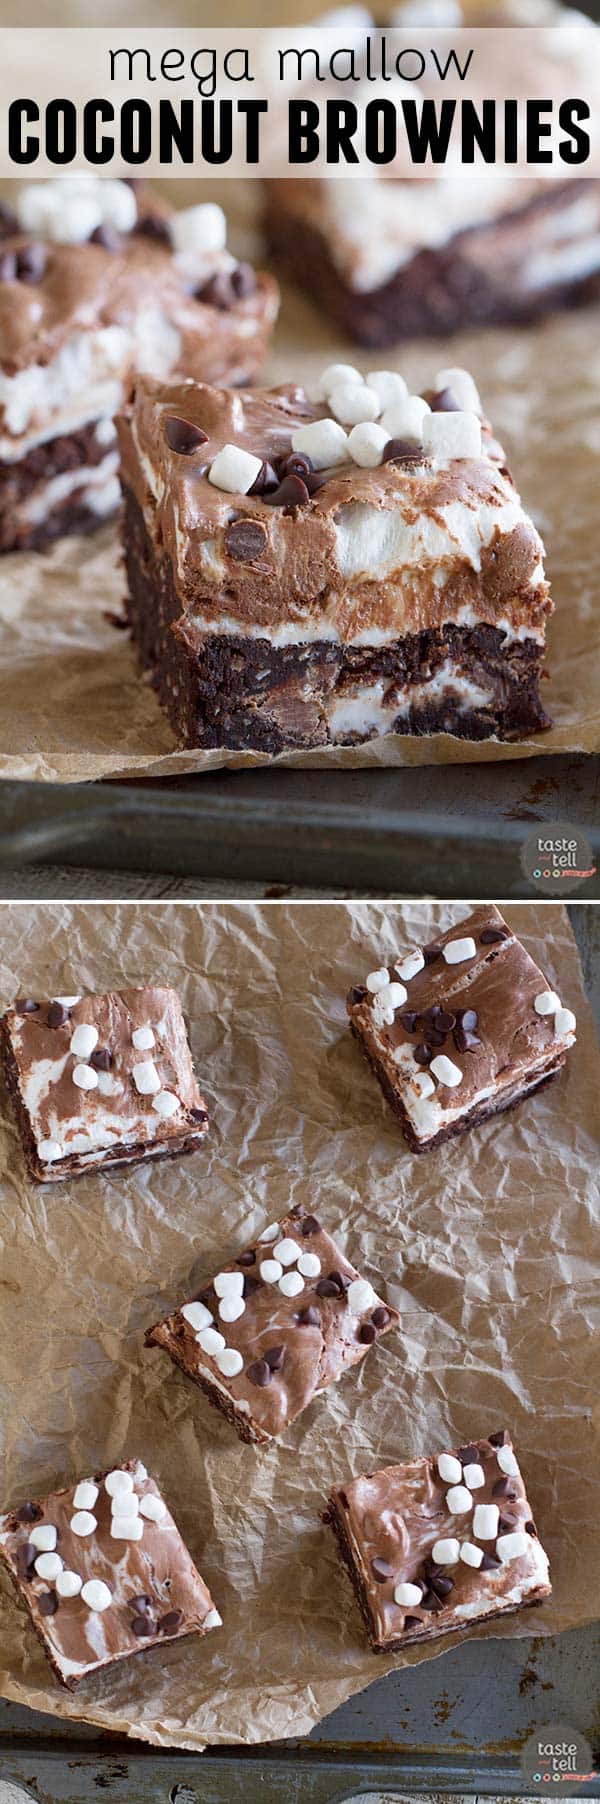 Brownies taken to the extreme - these Mega Mallow Coconut Brownies have rich, fudgy coconut brownies filled with Mallow Cups and topped with lots of marshmallow and chocolate. Prepare to indulge!